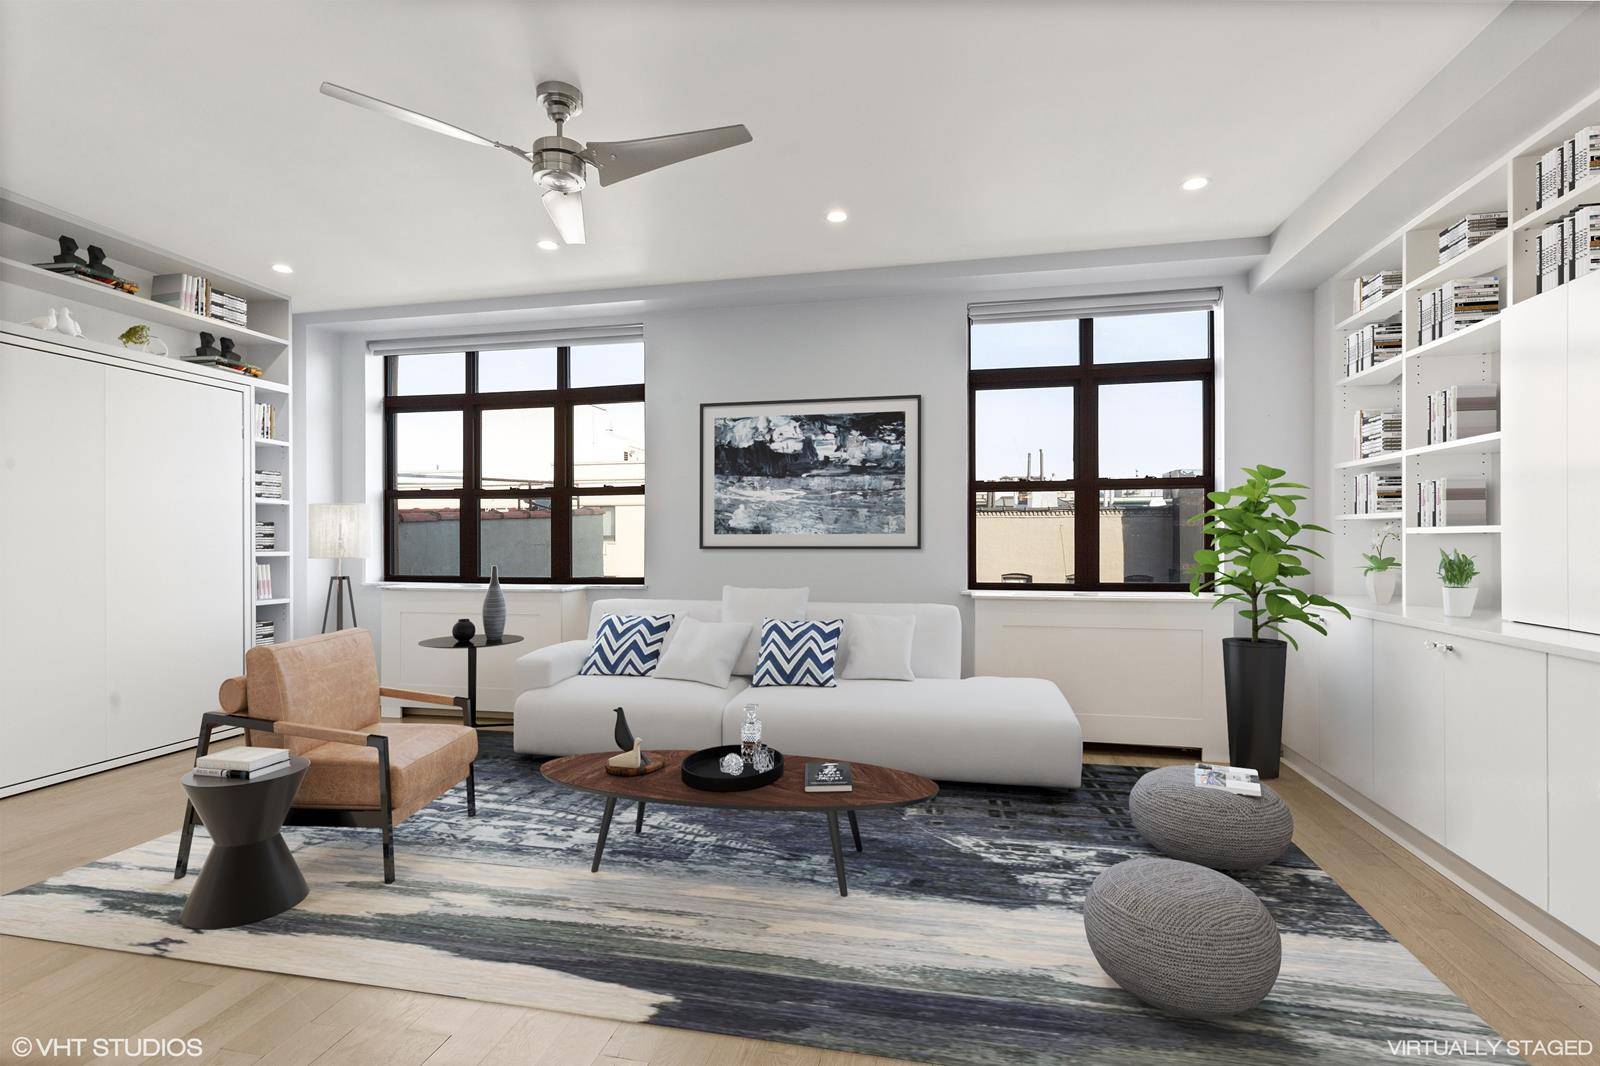 This immaculate and masterfully designed duplex encompasses the top two floors at South Harlem's Delaney Lofts and exudes both elegance and functionality.